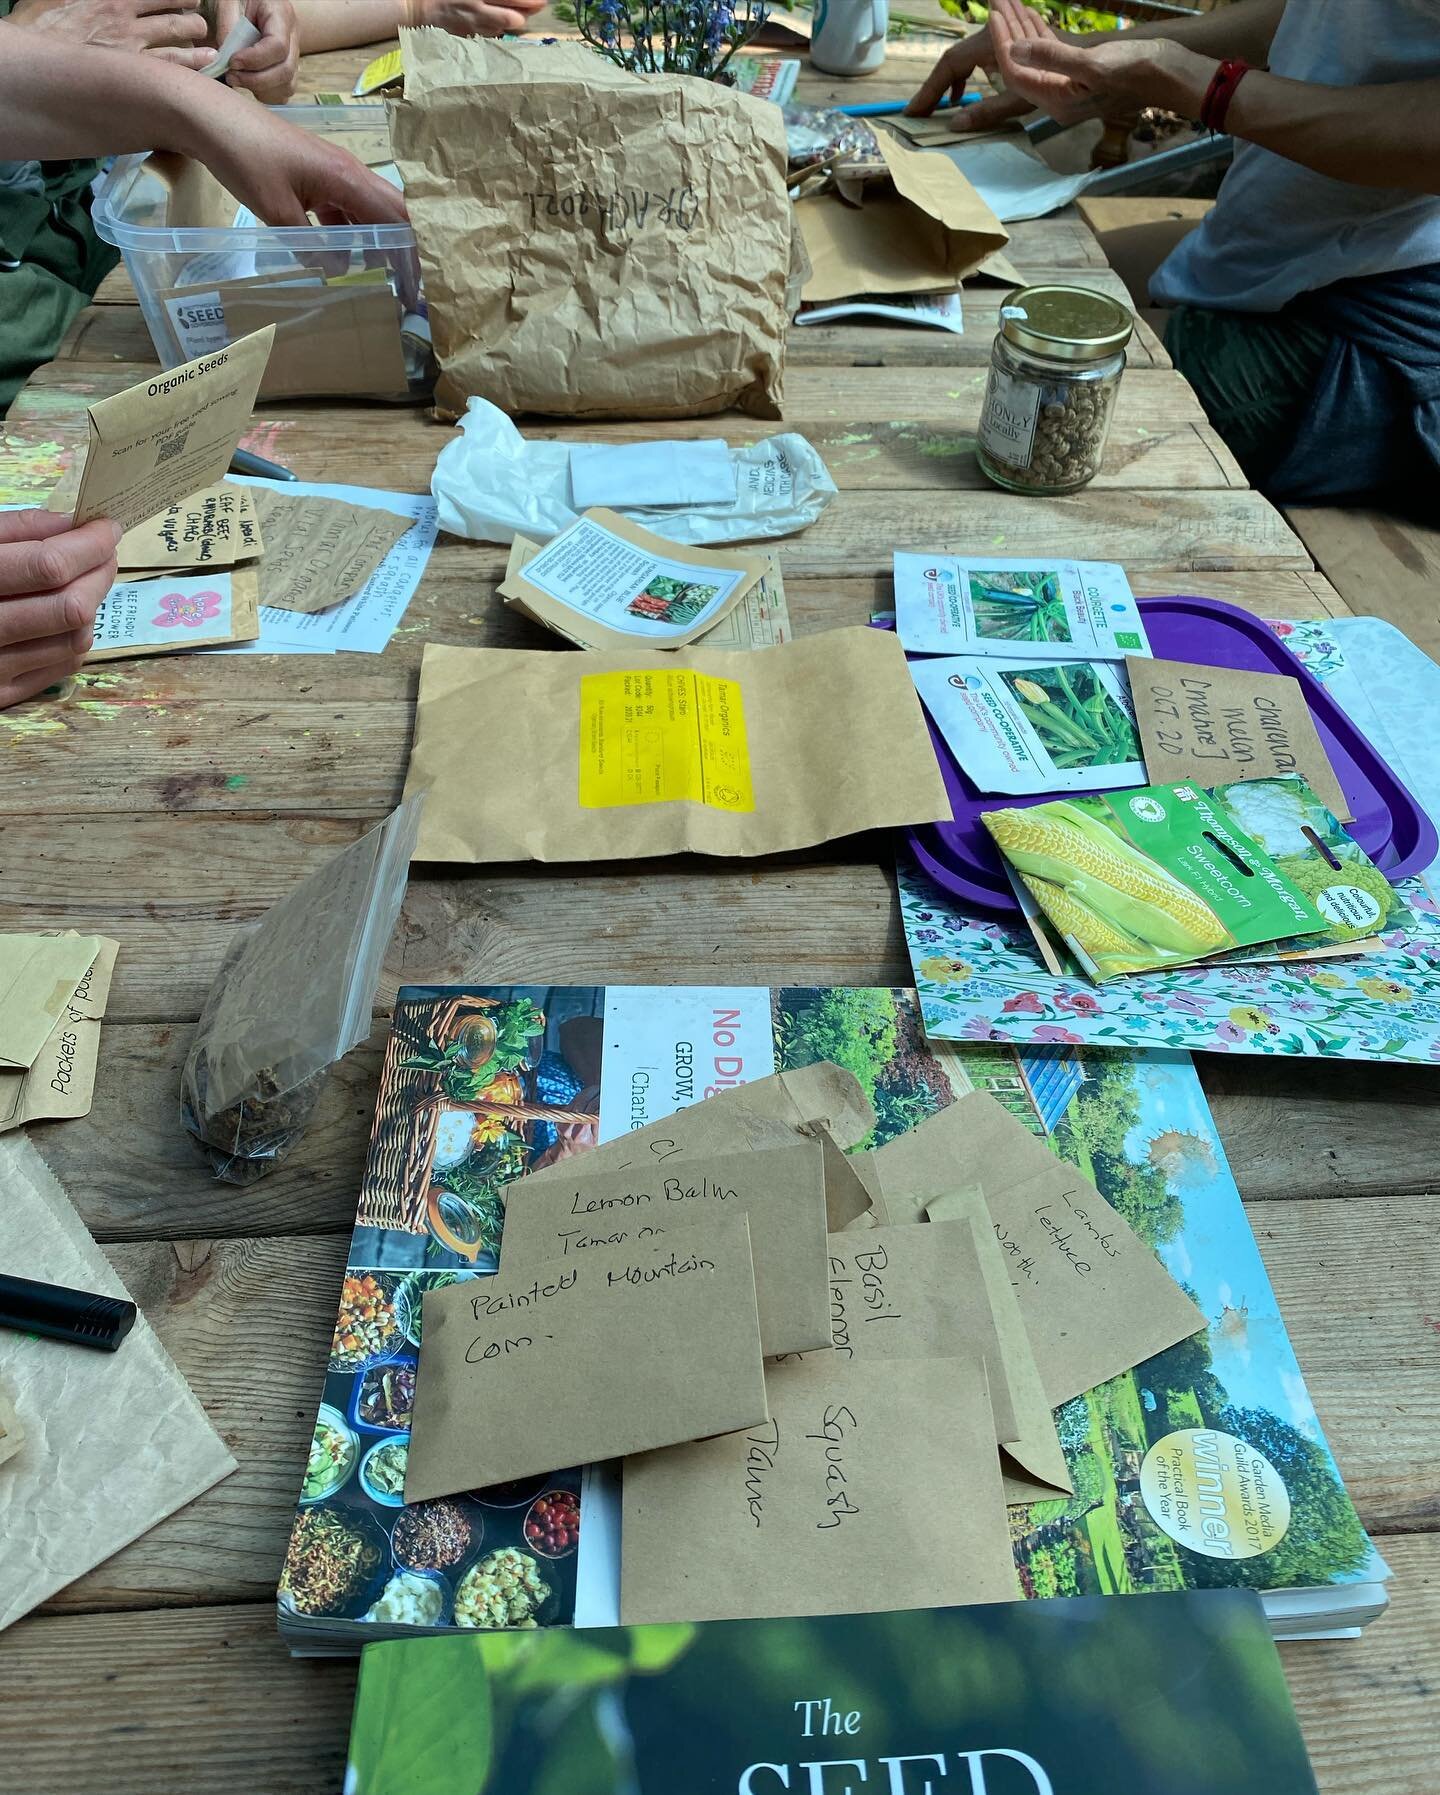 hello

✿ we are a social enterprise based near nottingham (uk) 

✿ we teach over 50 primary school children every week how to grow food and develop permaculture skills

✿ we encourage and establish seed saving practises and seed libraries within comm